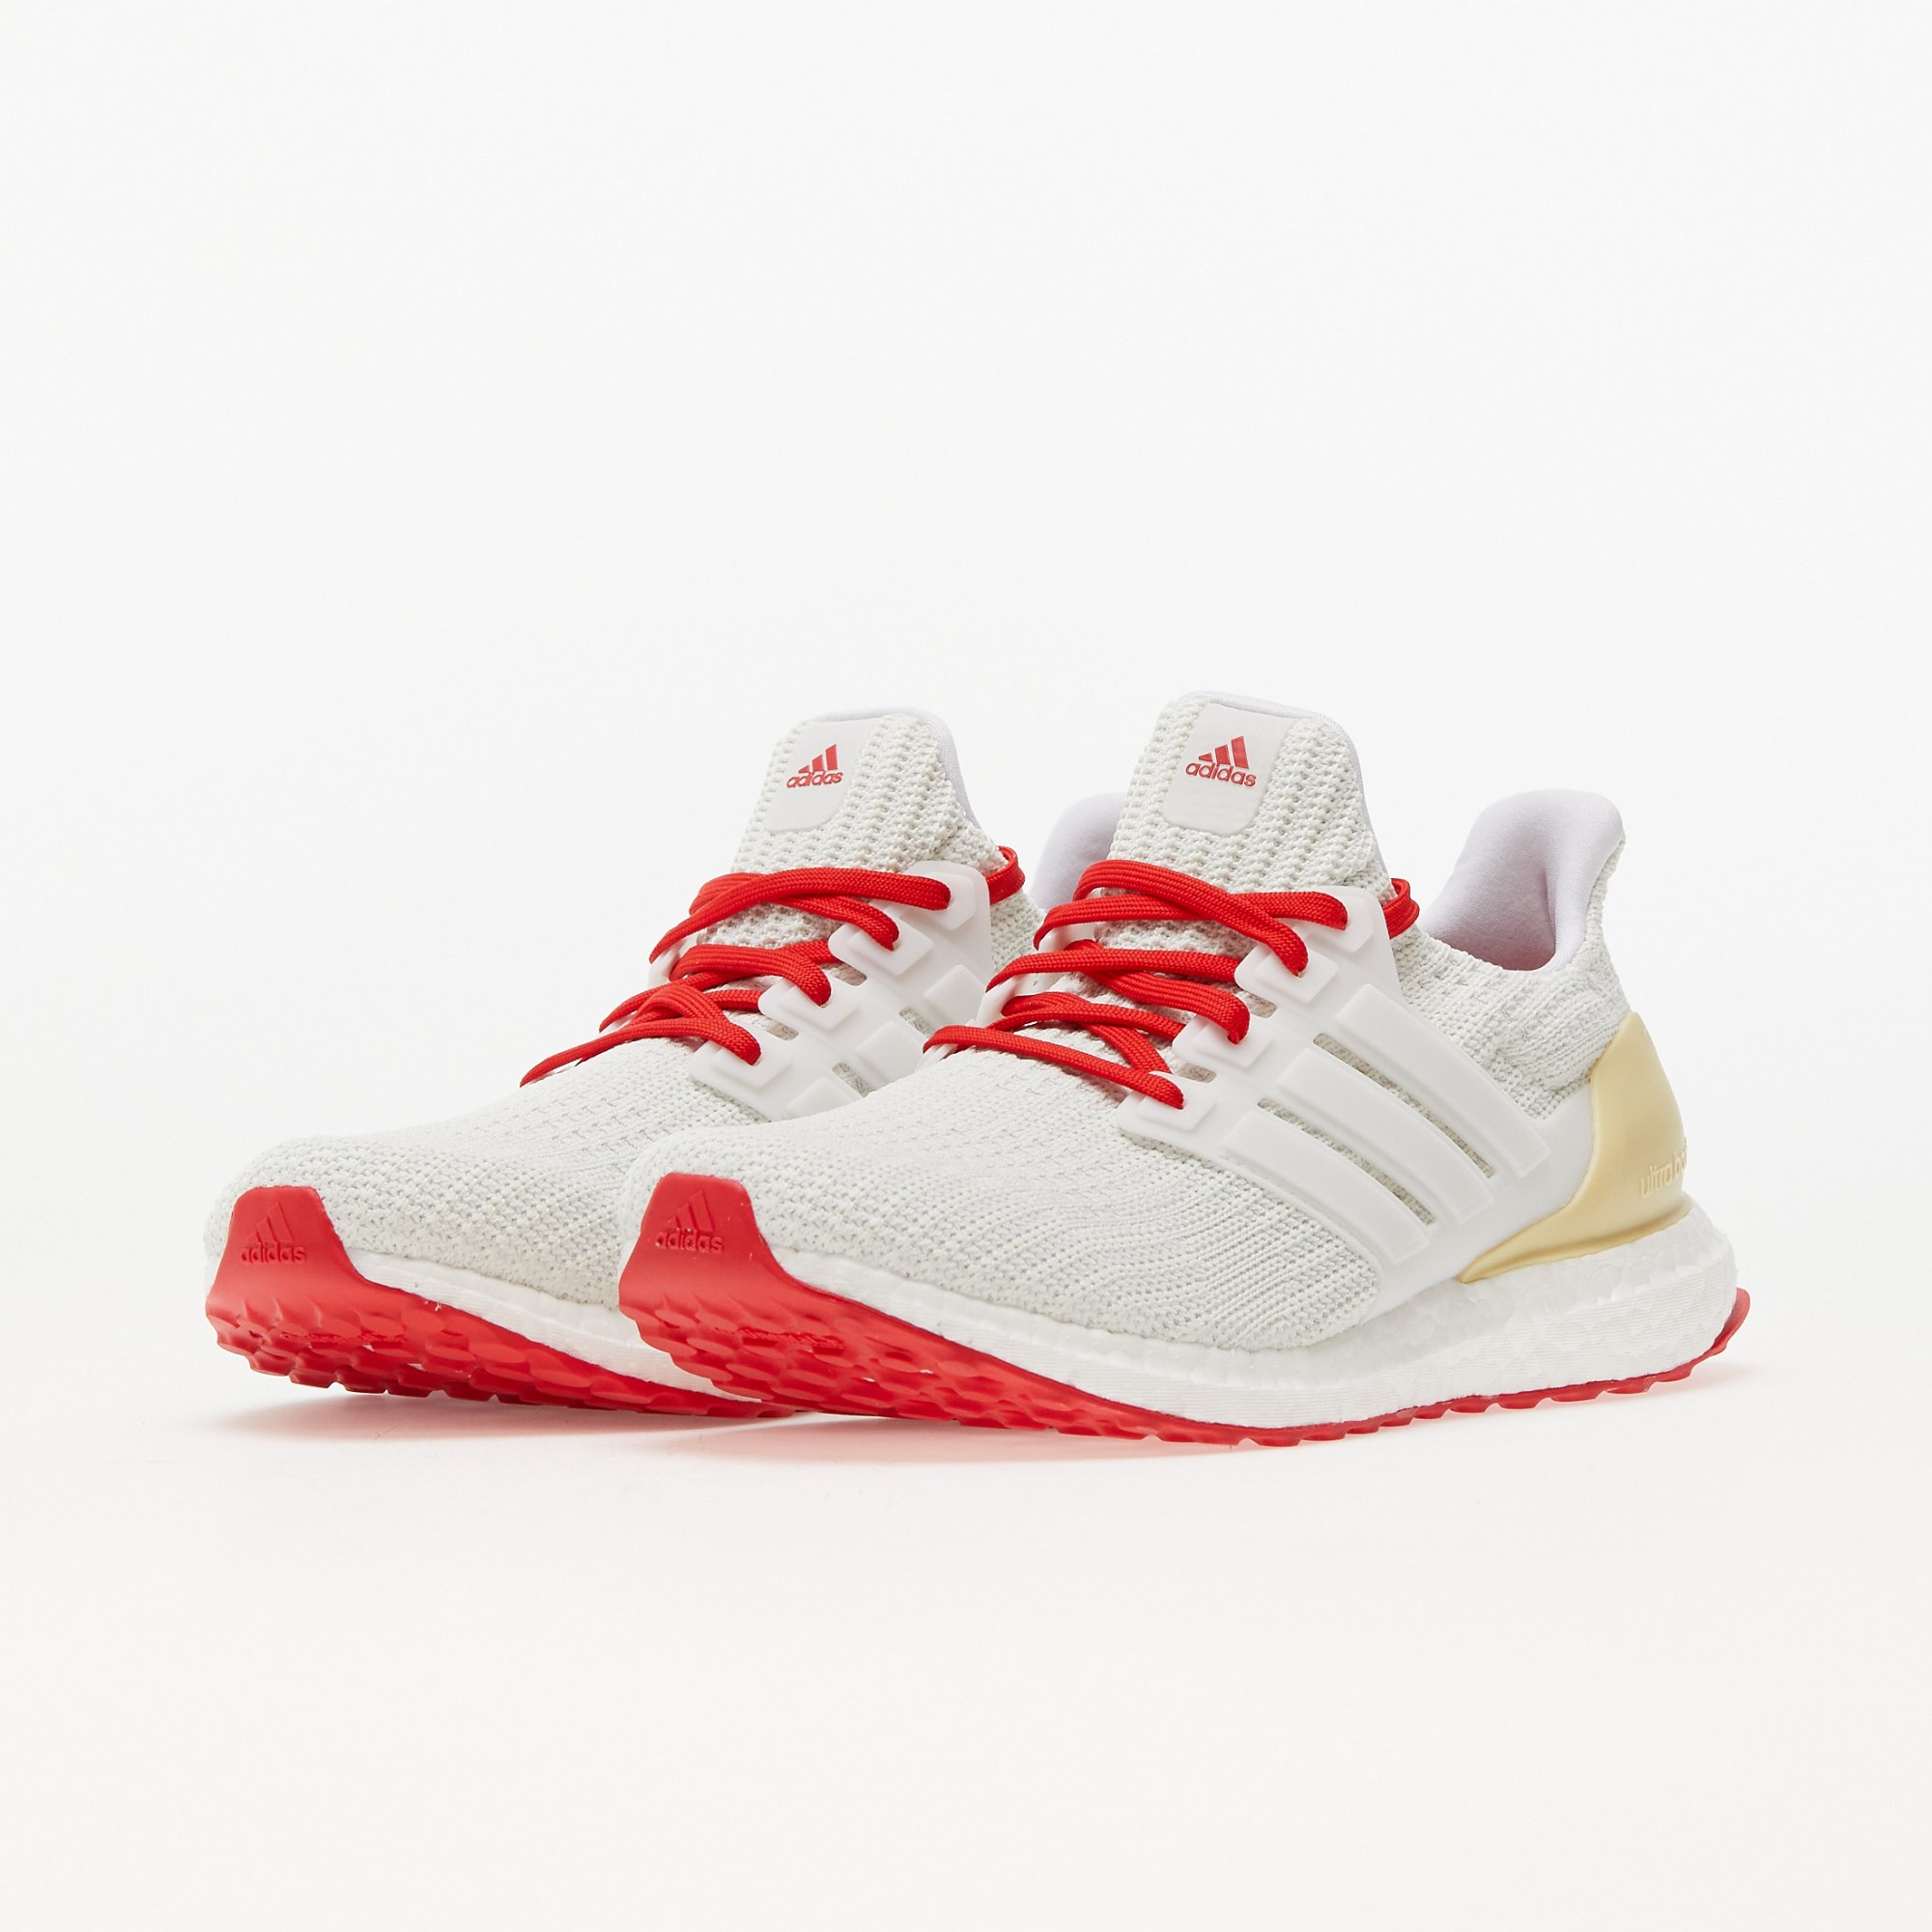 adidas Performance Ultraboost 4.0 DNA White Tint / White Tint / Vivid Red adidas Performance